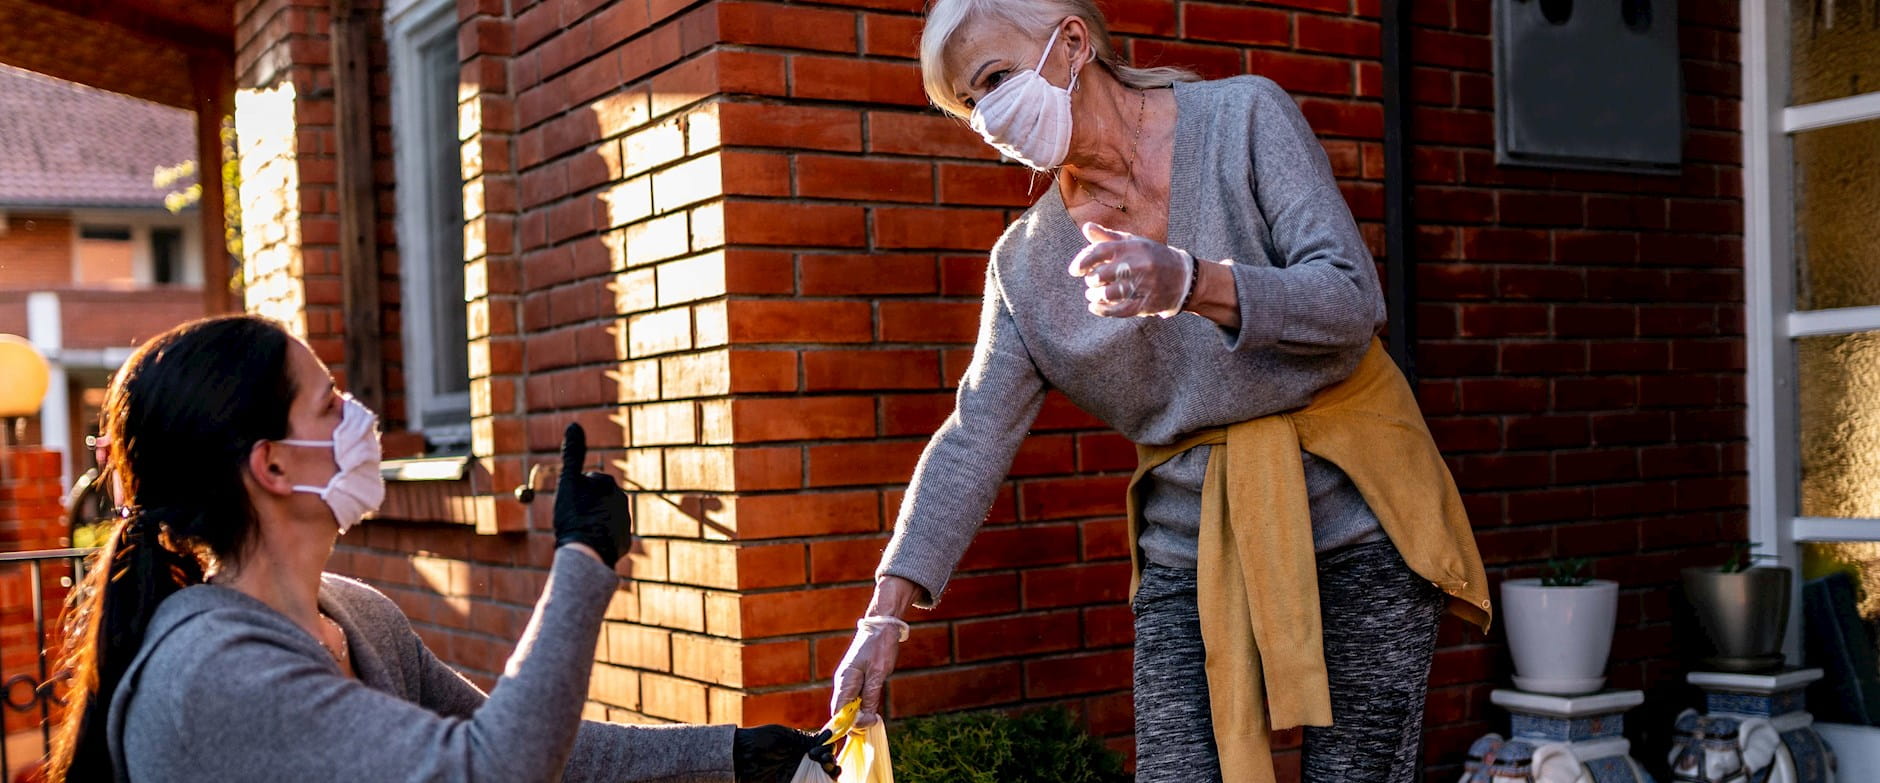 A masked volunteer hands groceries off to a silver-haired woman and gives her a thumbs-up